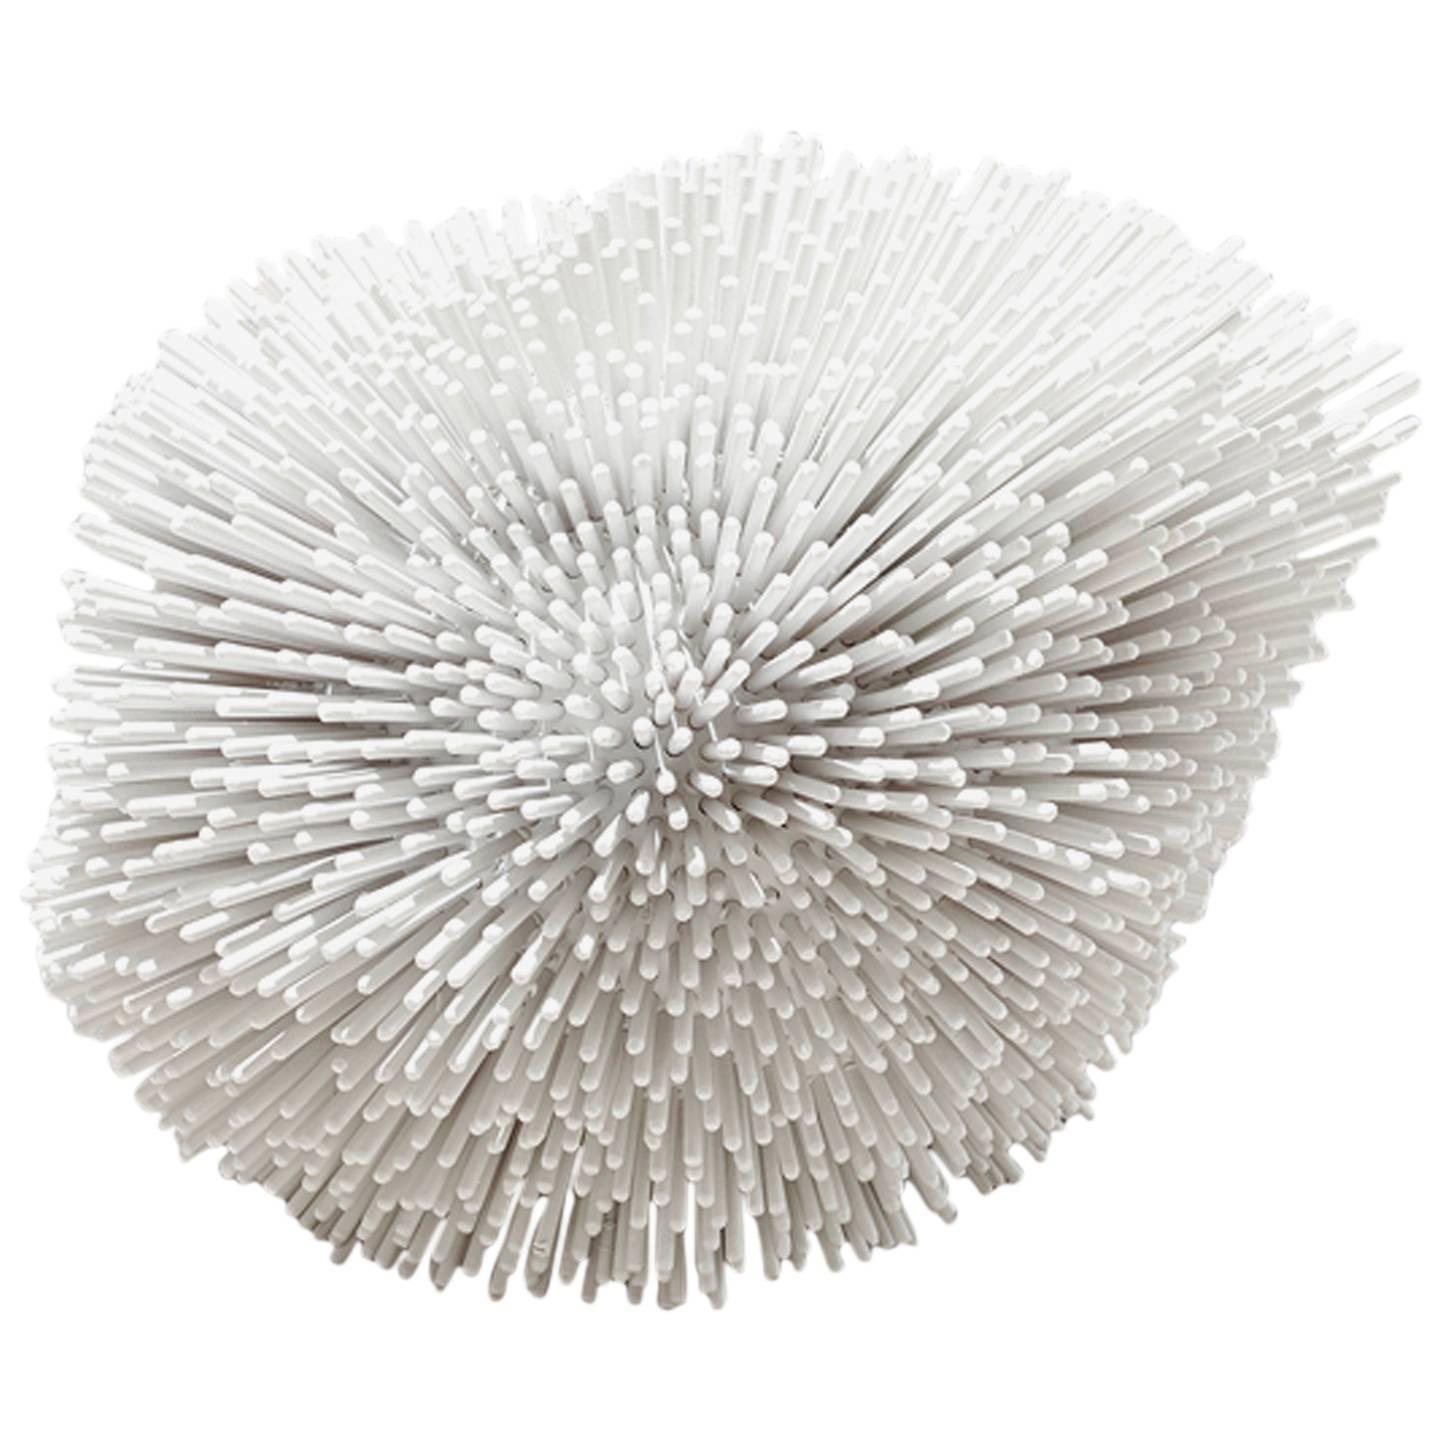 'Sea Anemone' Sculpture by Pia Maria Raeder For Sale